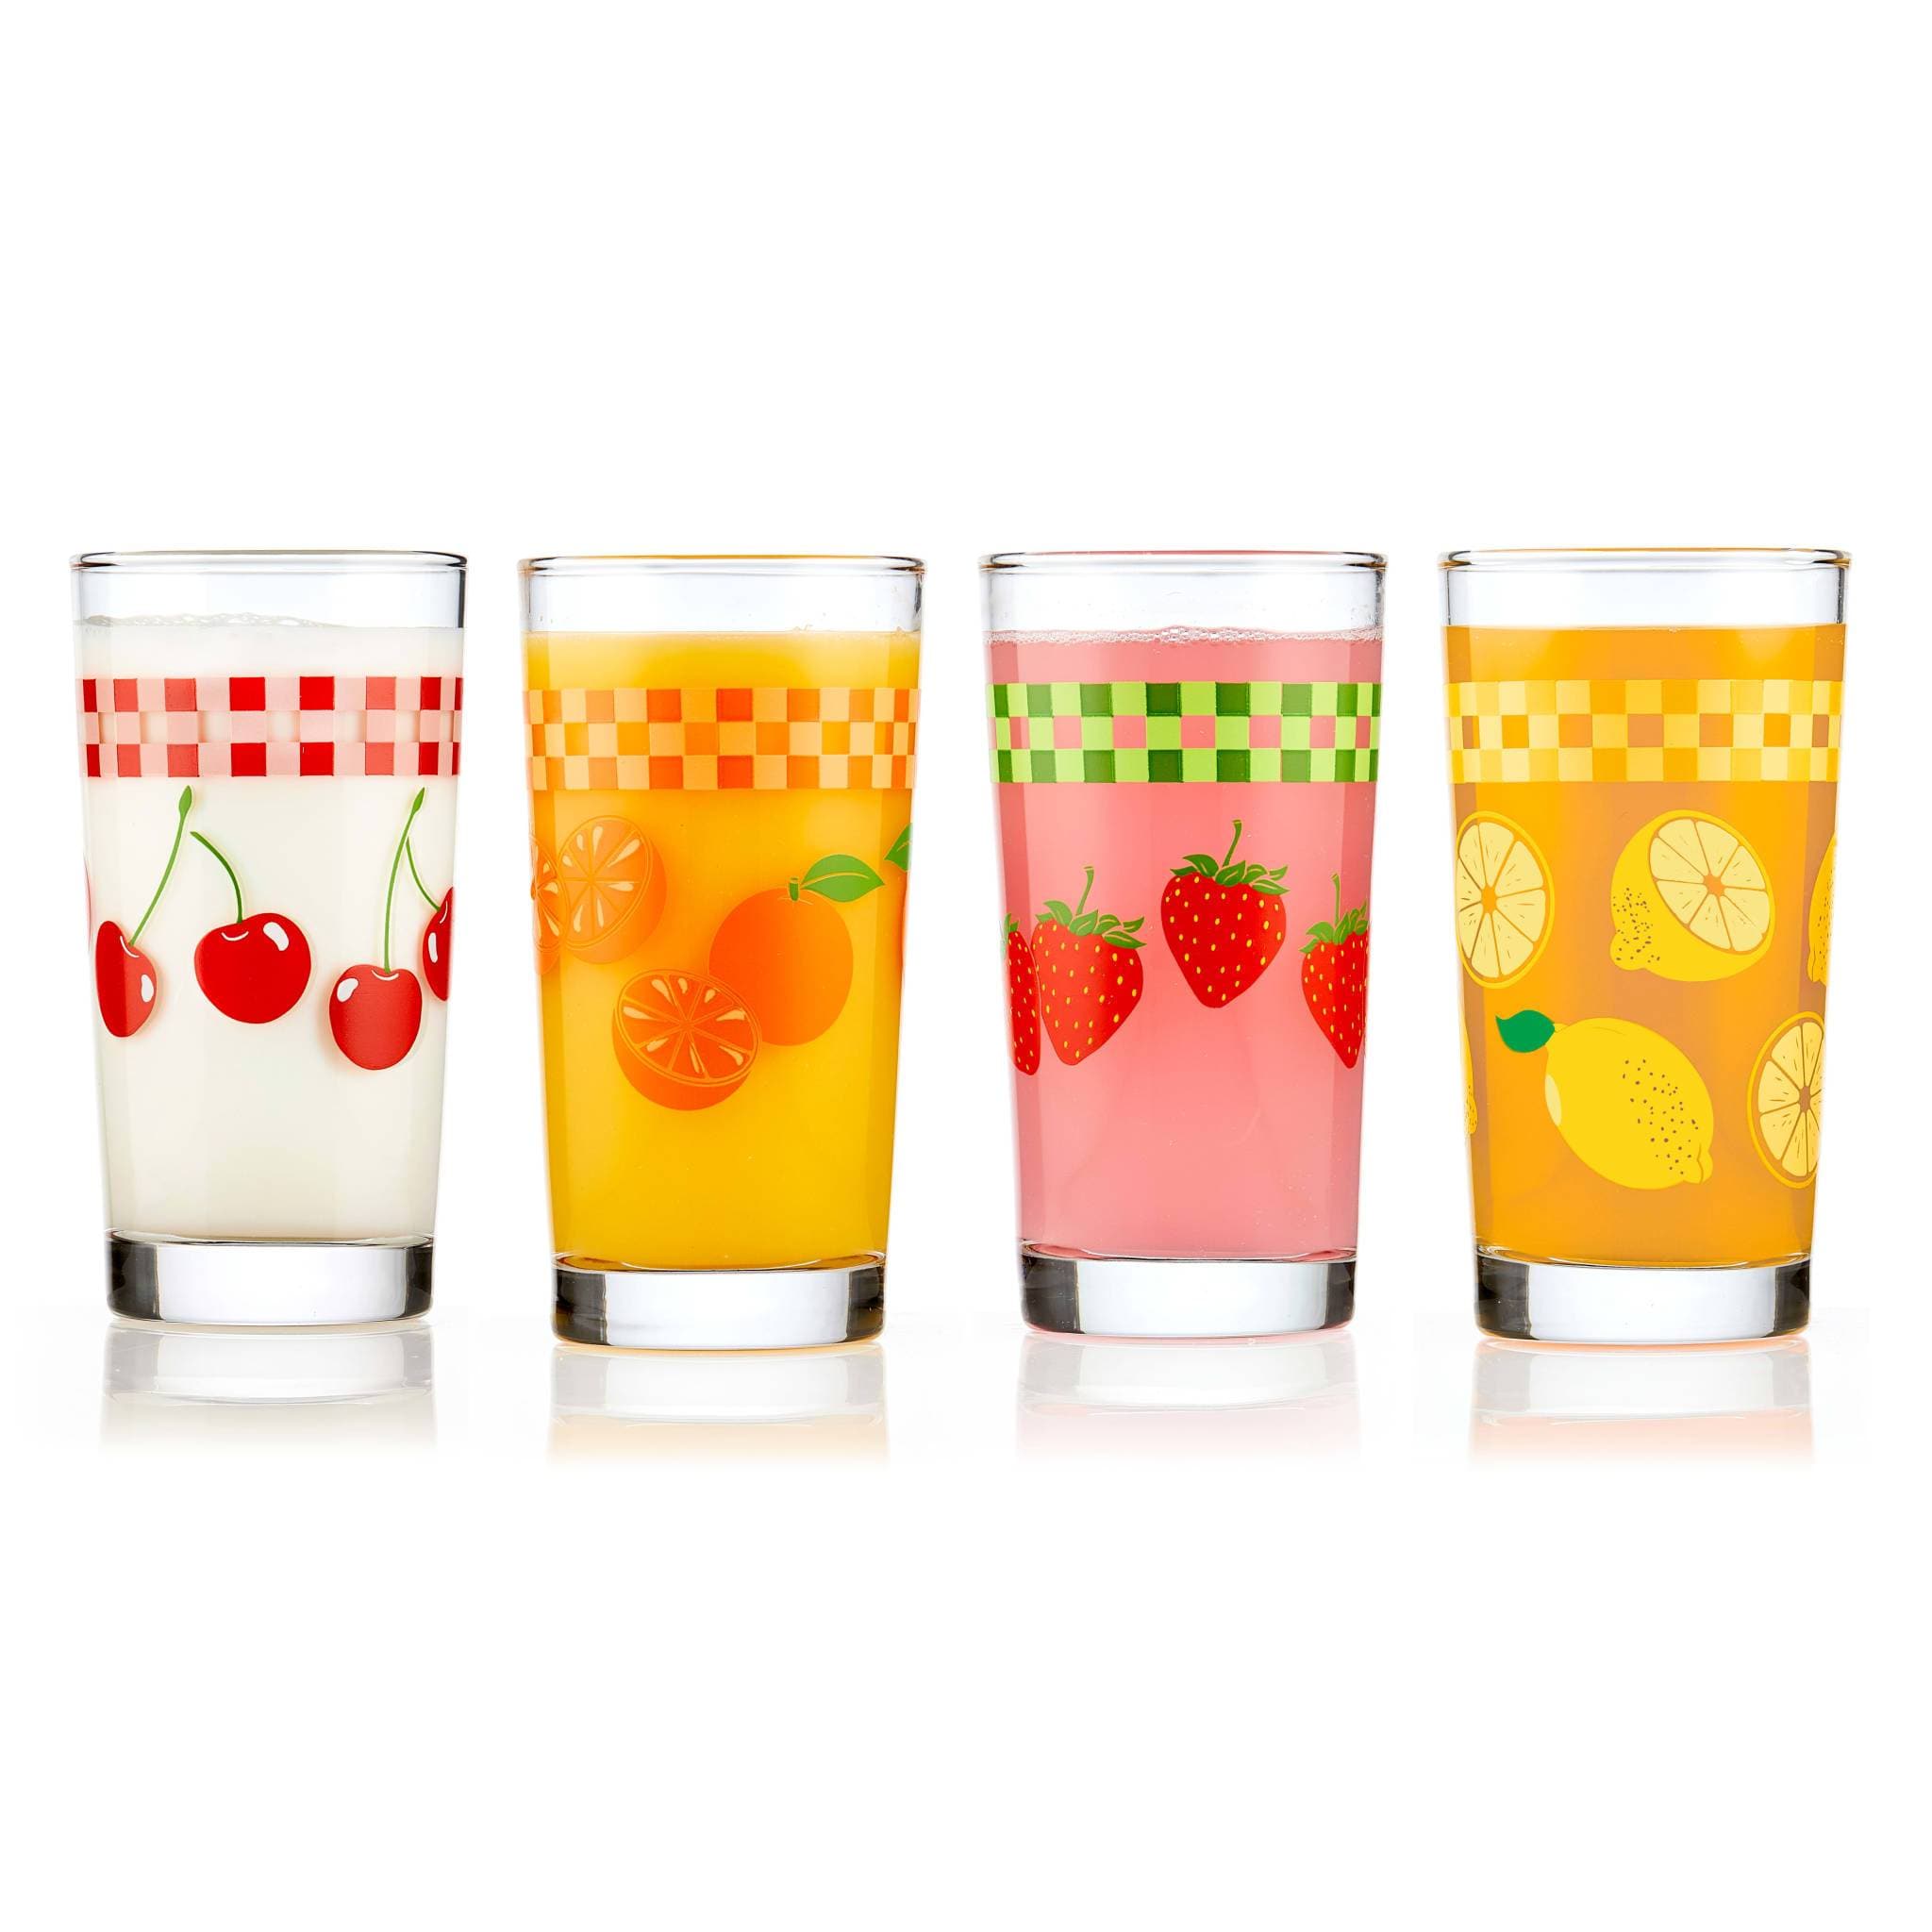 Vintage-Inspired Drinking Glasses, 11-ounce, Assorted, Set of 4